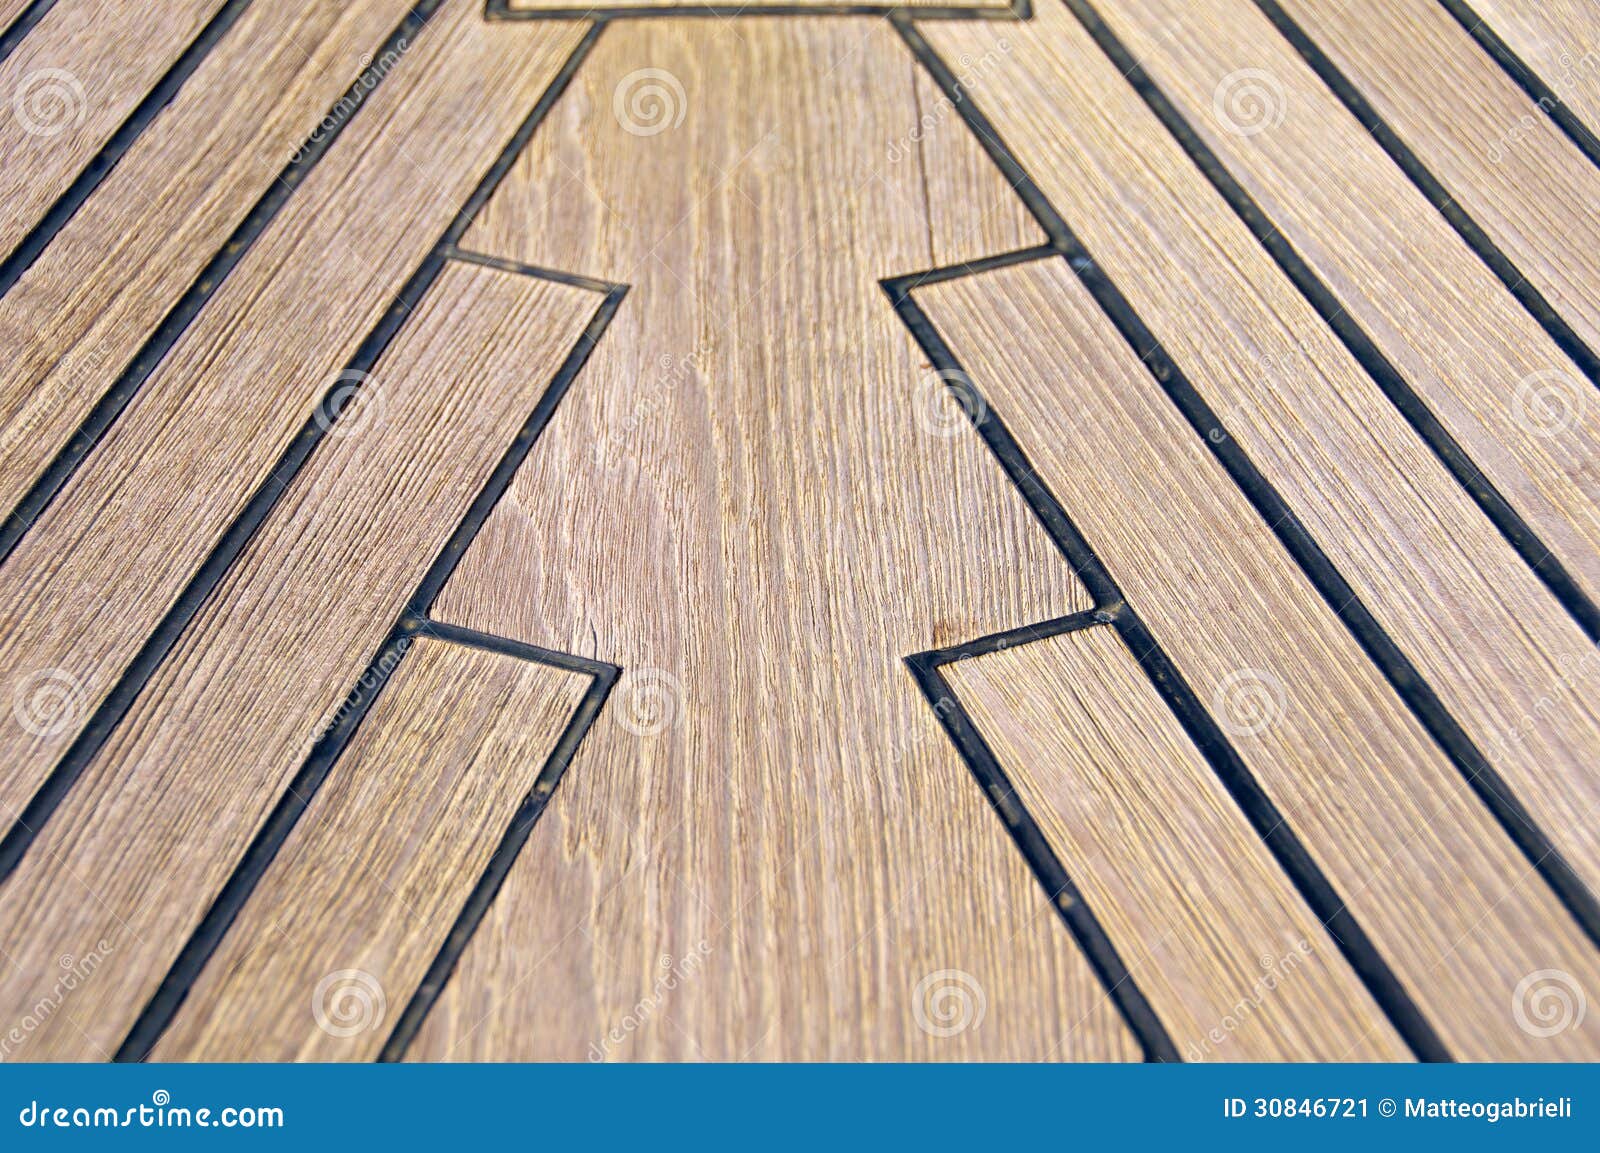 Sailboat Bow, Wood Deck Detail, Italy Stock Image - Image ...